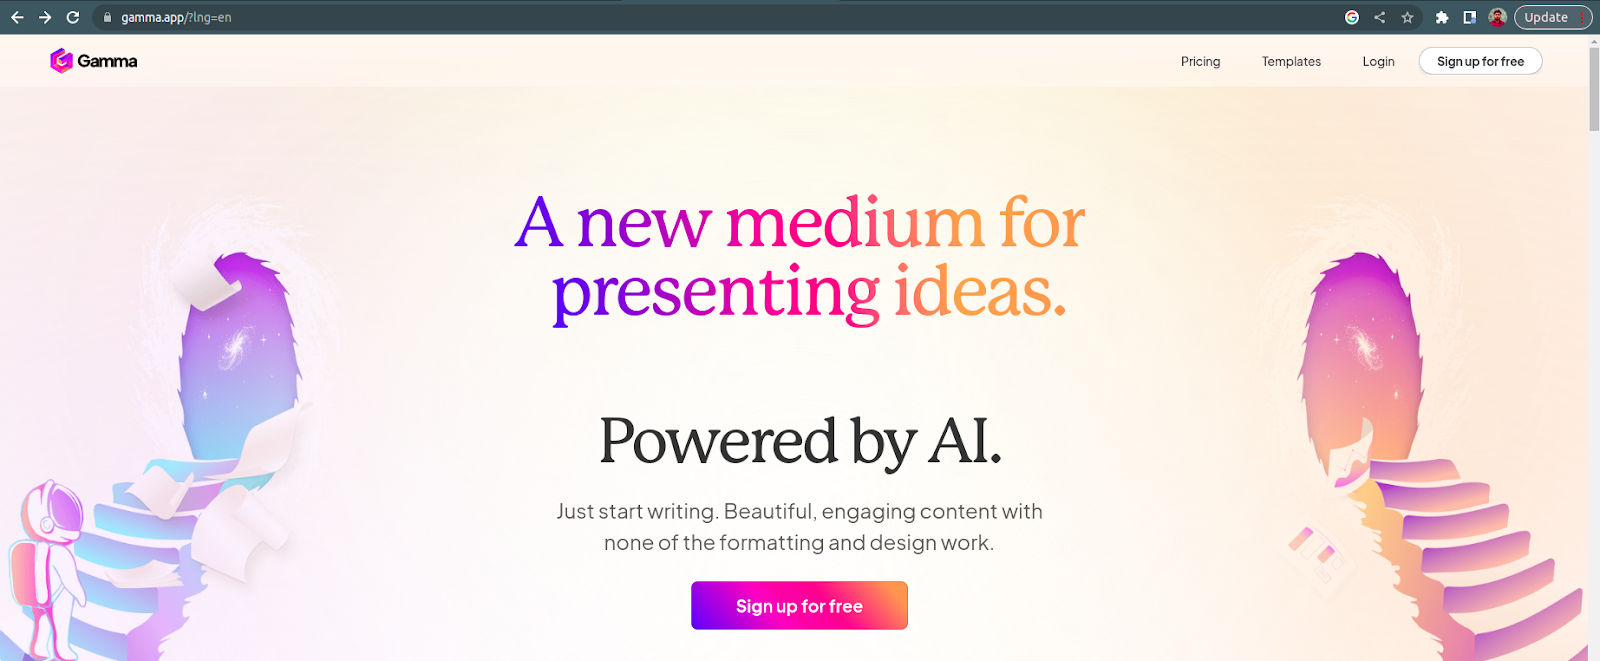 PowerPoint Presentations in Minutes with GAMMA